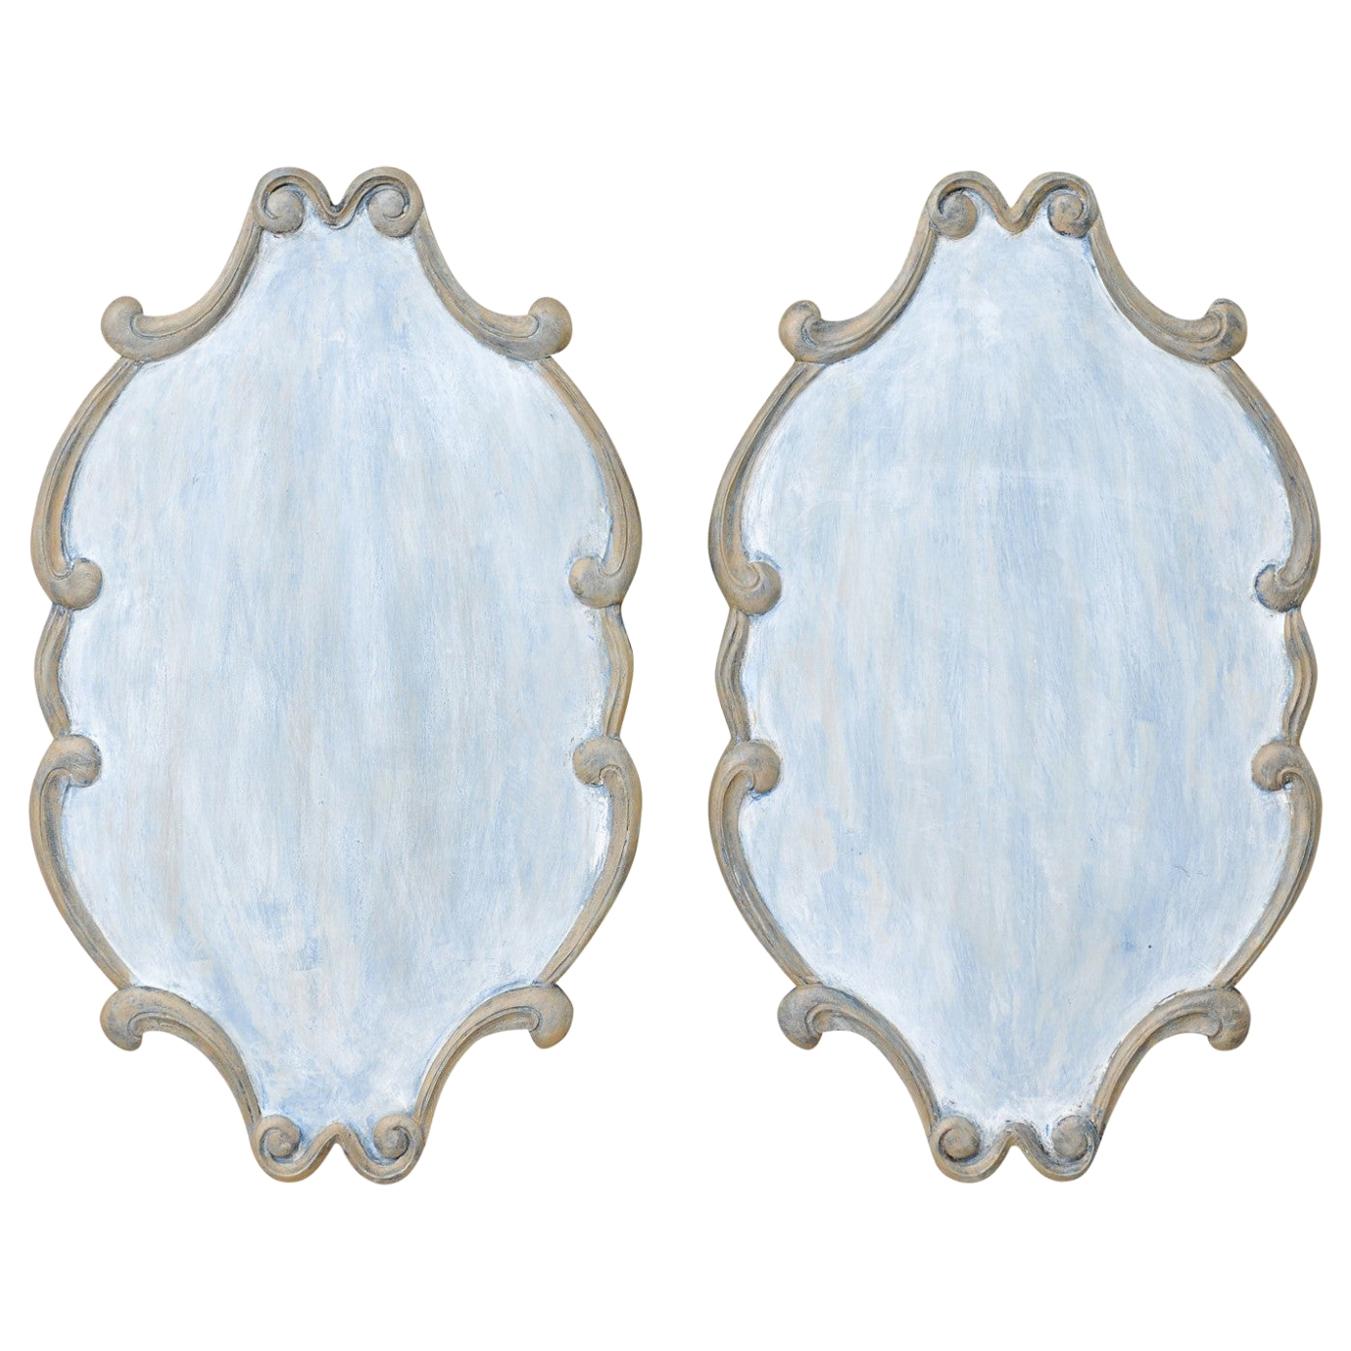 Pair of Custom Carved Wall Plaques in Blue & Pewter with Scrolling Trim Boarder